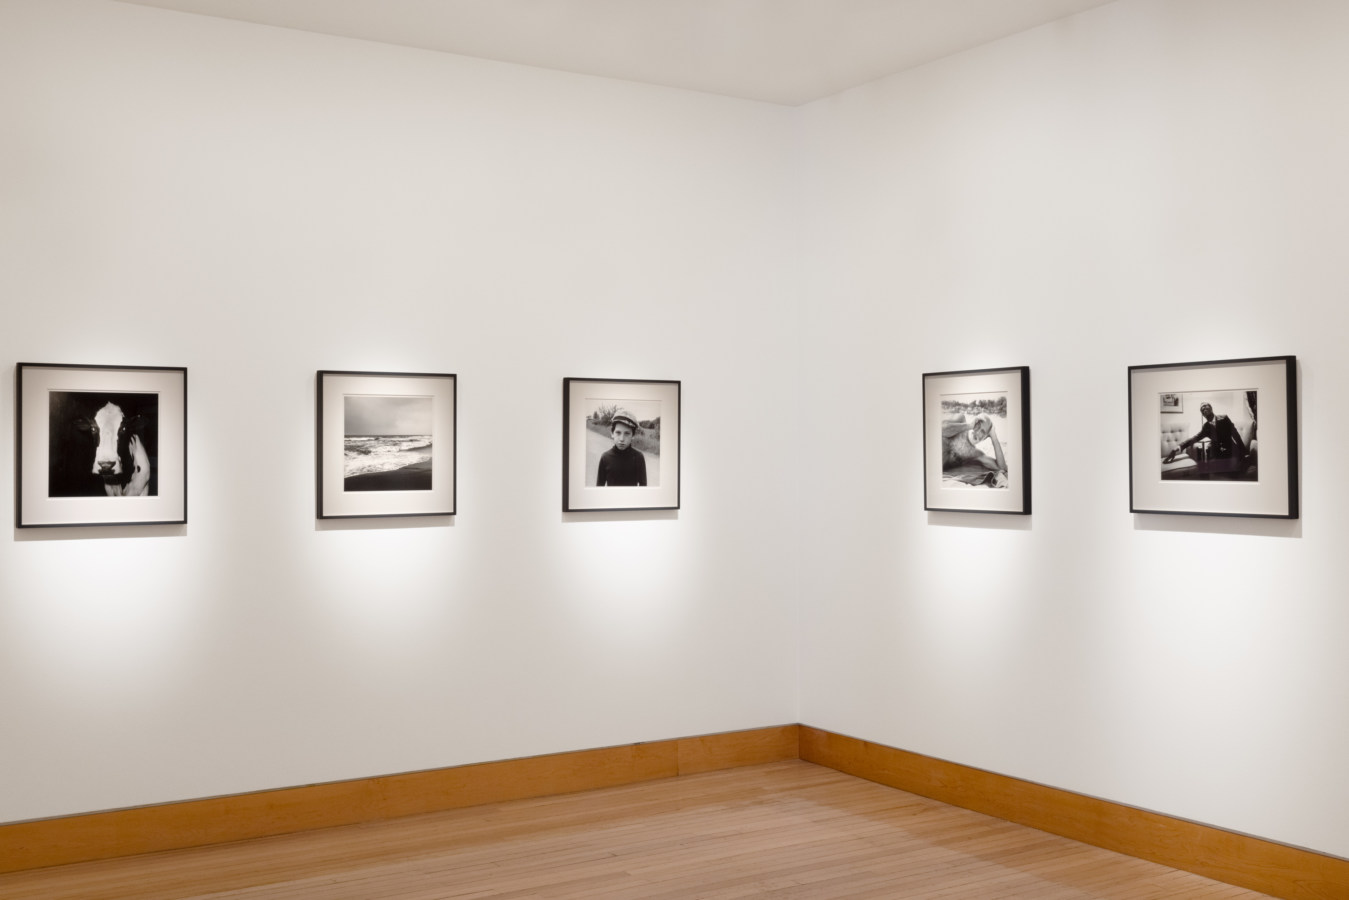 Color image of gallery with black and white photographs framed in black on white walls